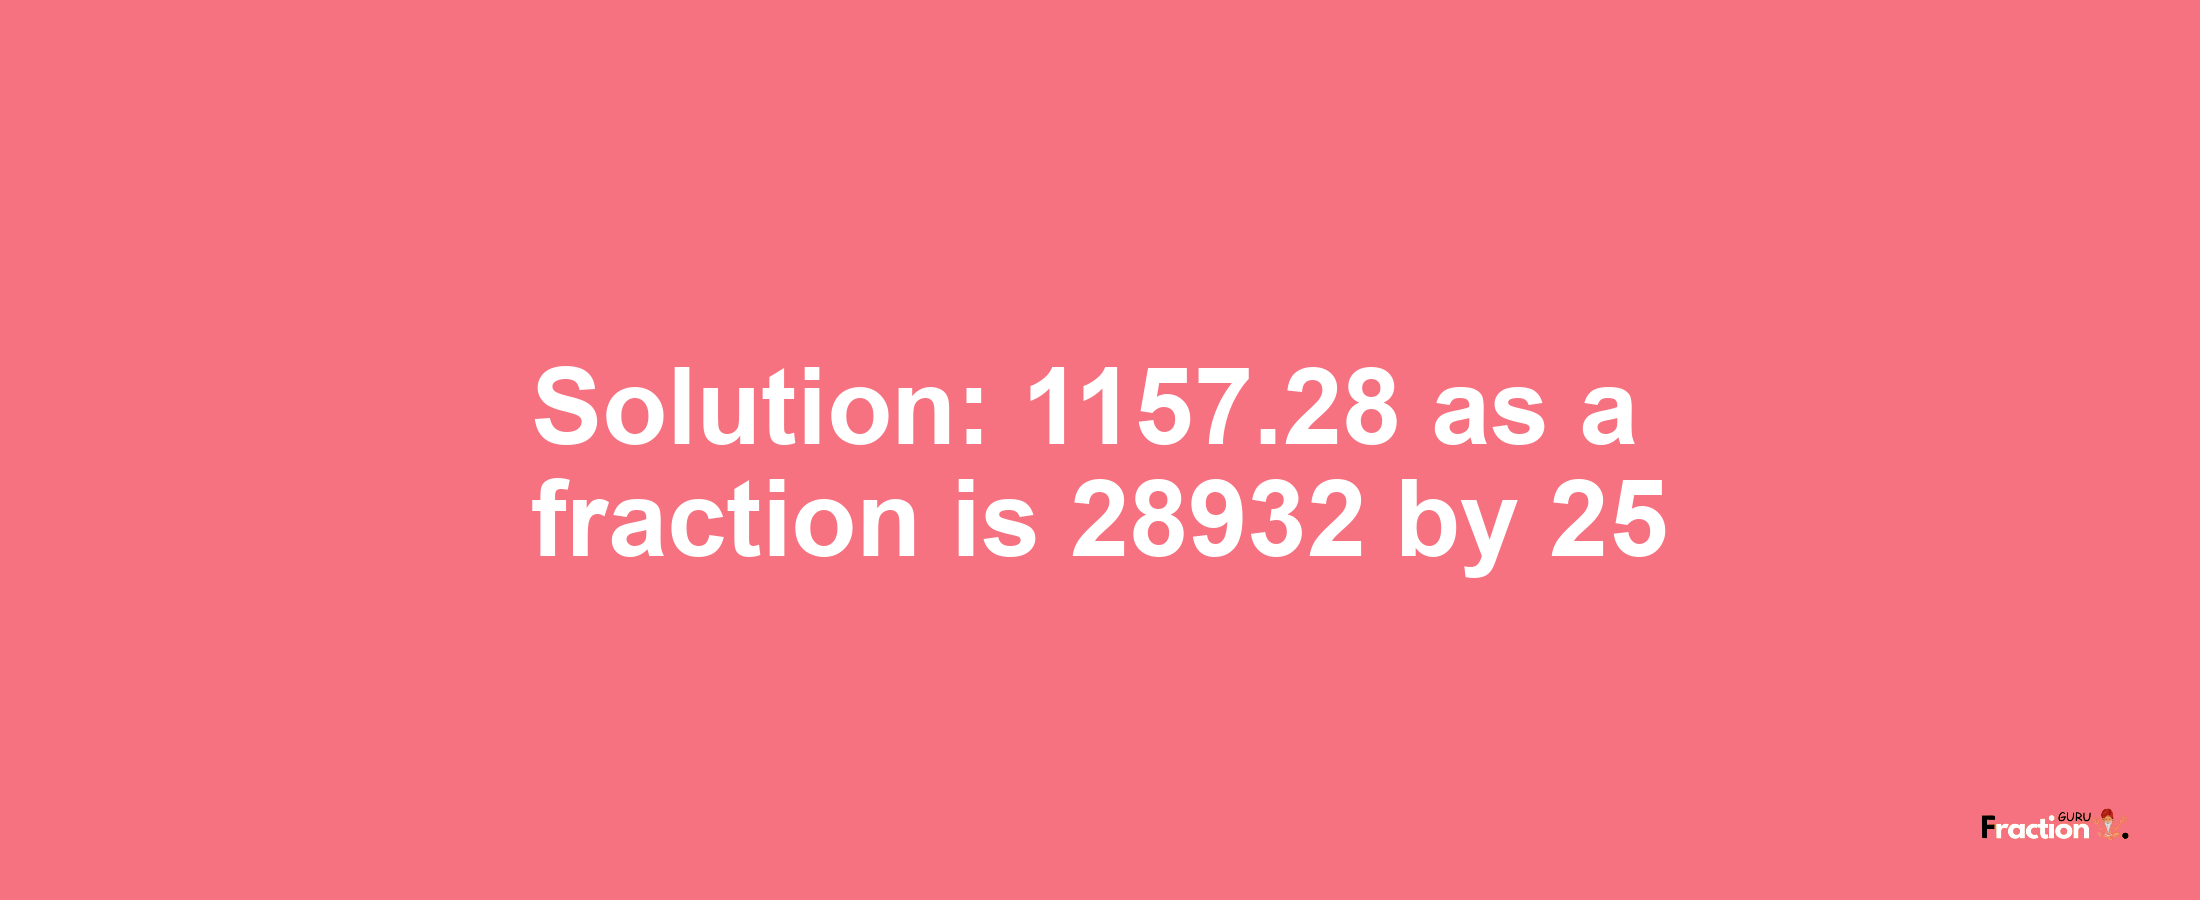 Solution:1157.28 as a fraction is 28932/25